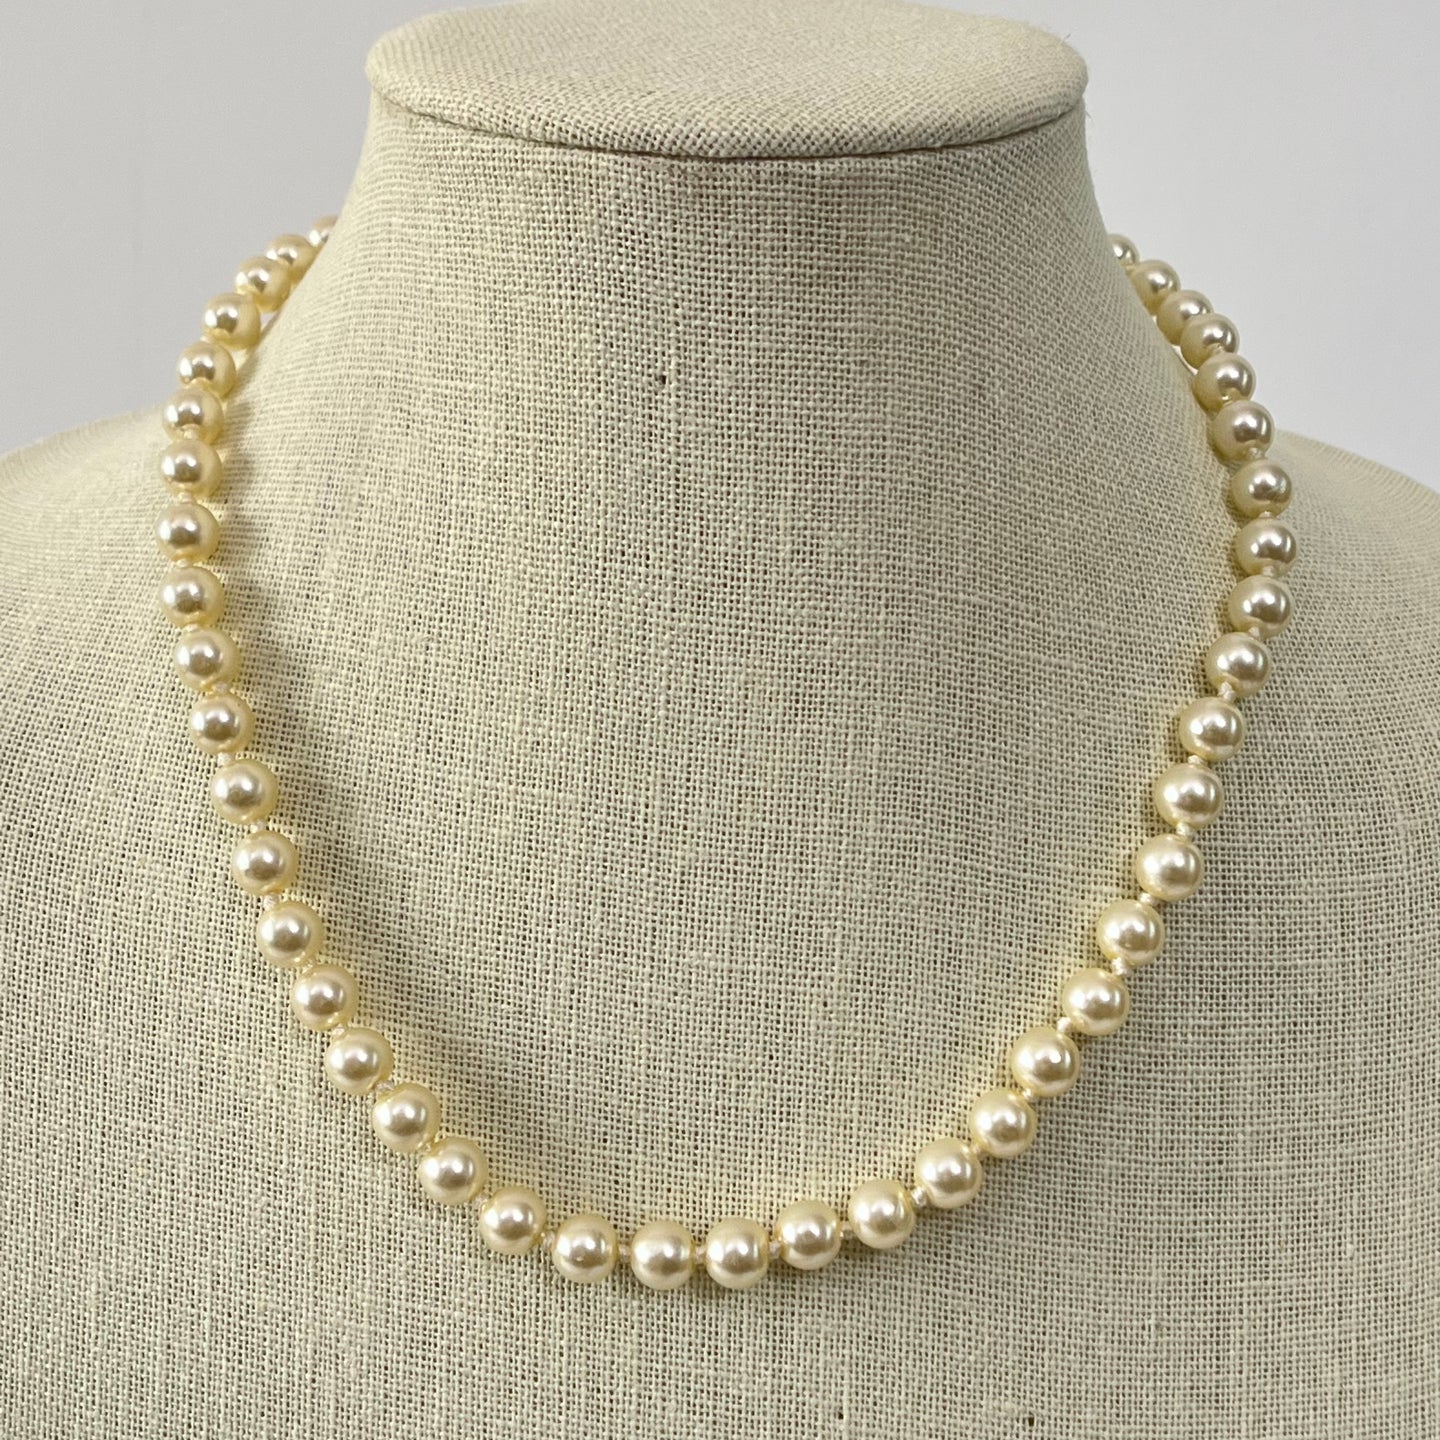 Retro Knotted Faux Pearl Necklace with gold tone filigree push lock closure. 